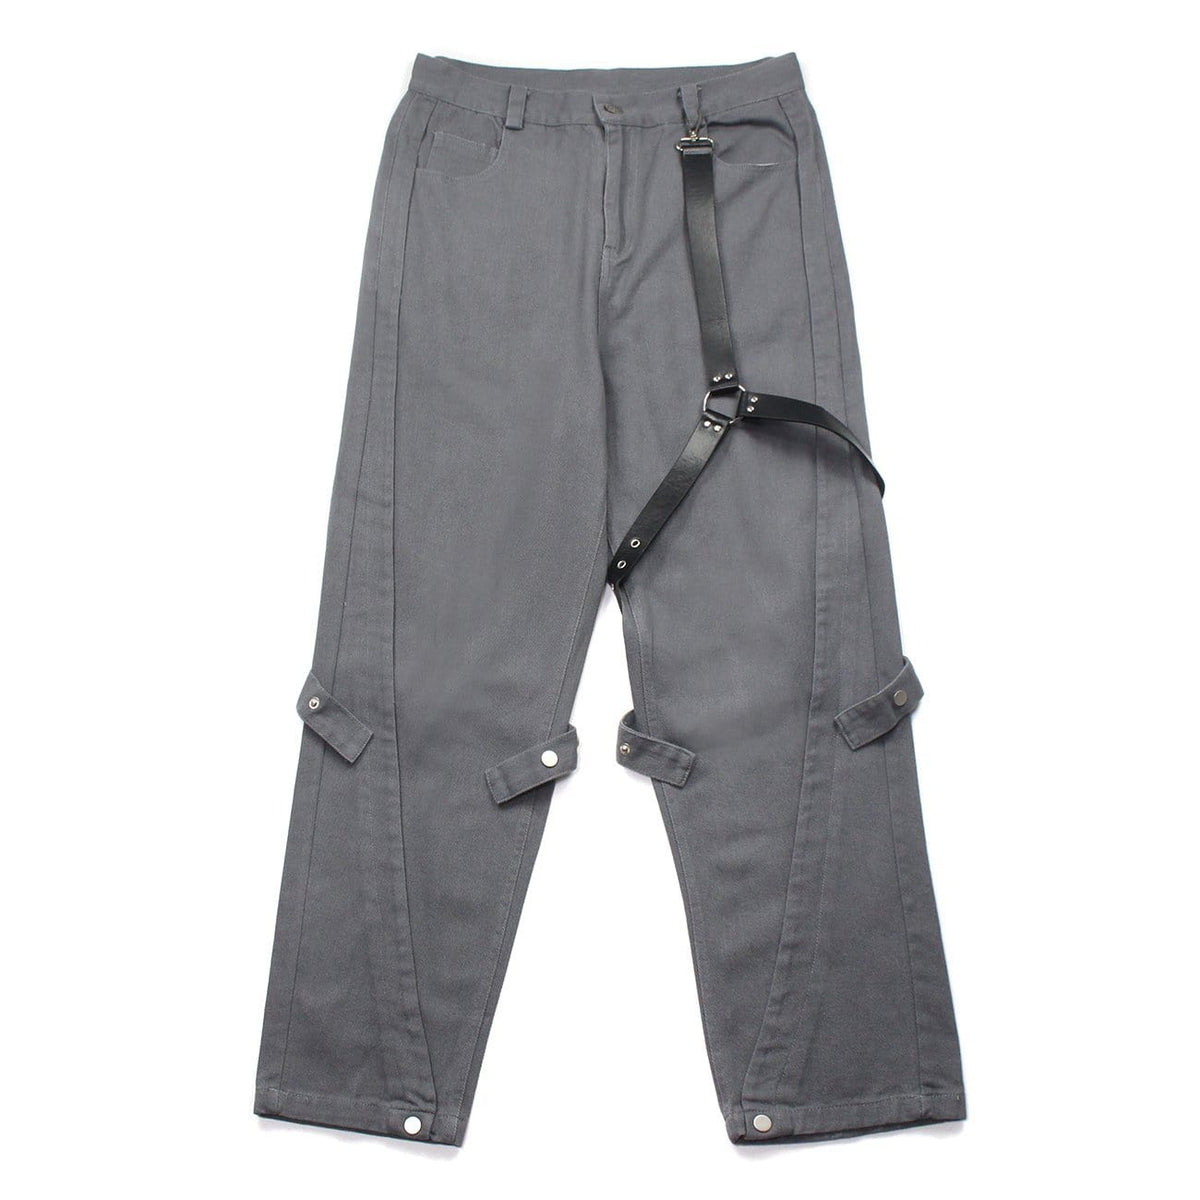 TO Buckle Straps Pants – Techwear On